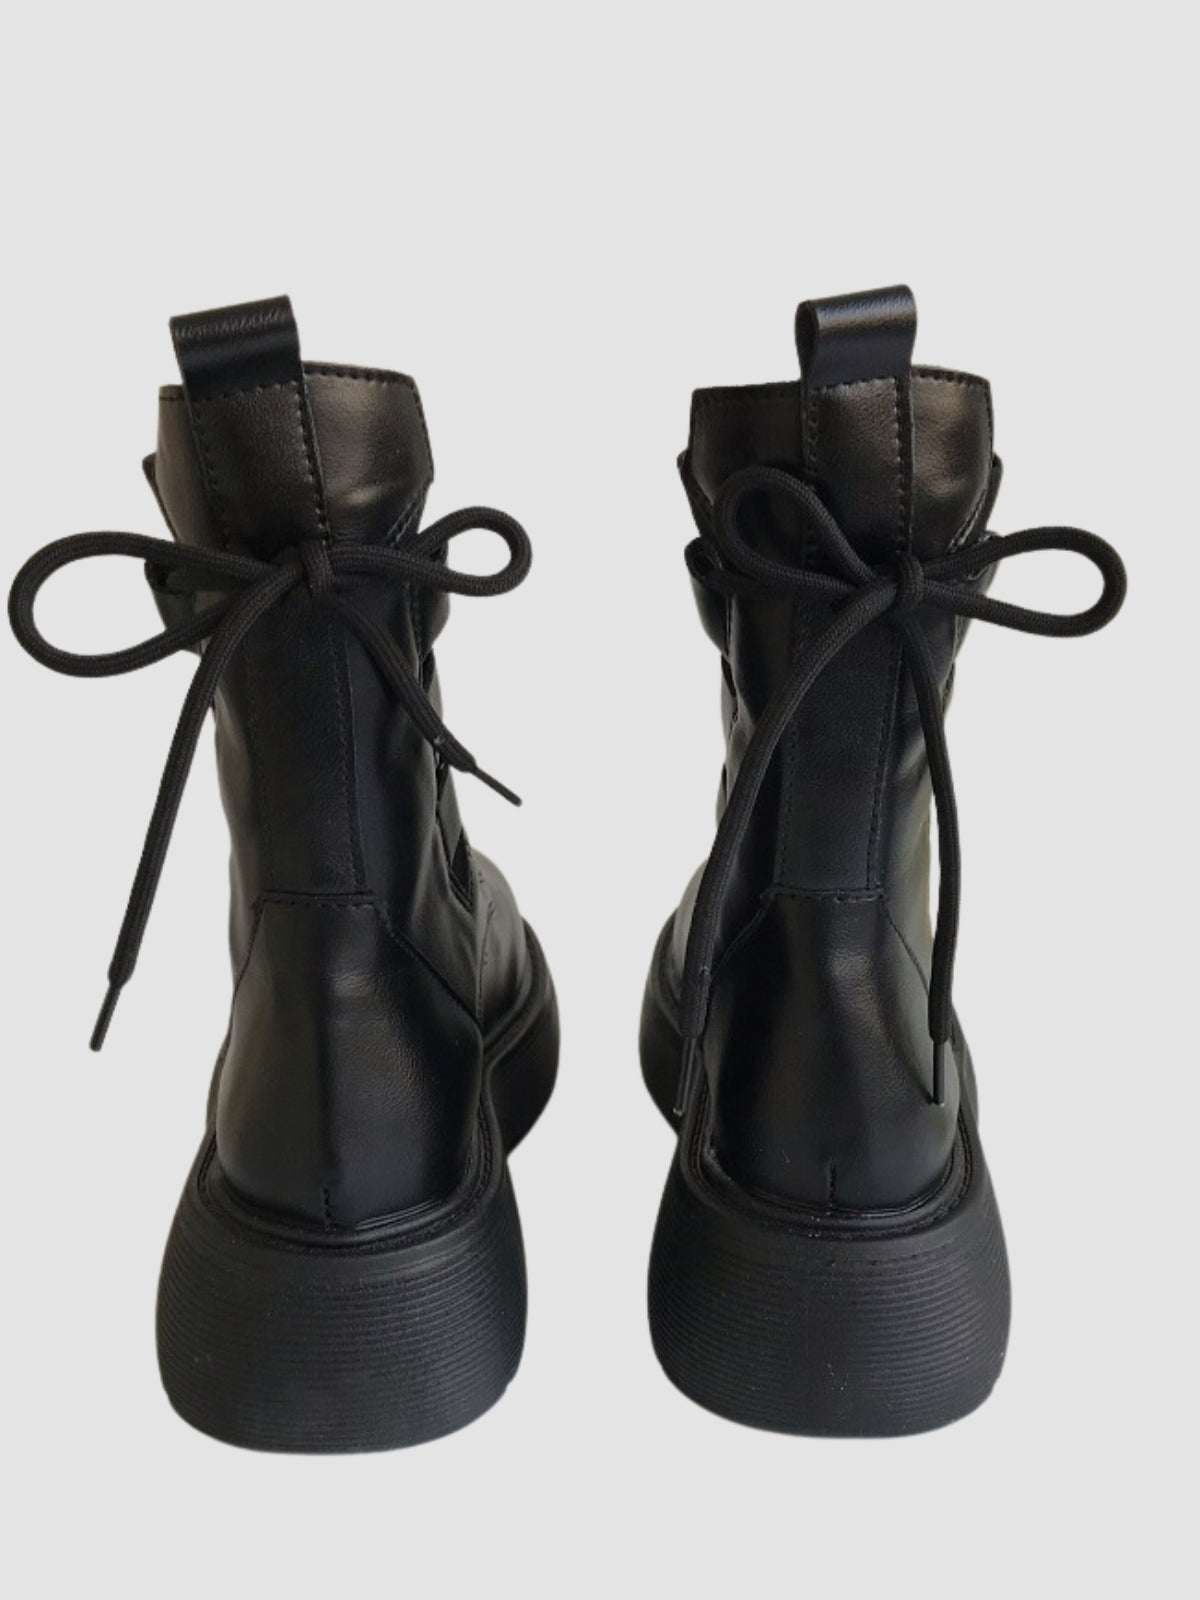 WLS Knitted Lace Up Velvet Women Short Boots